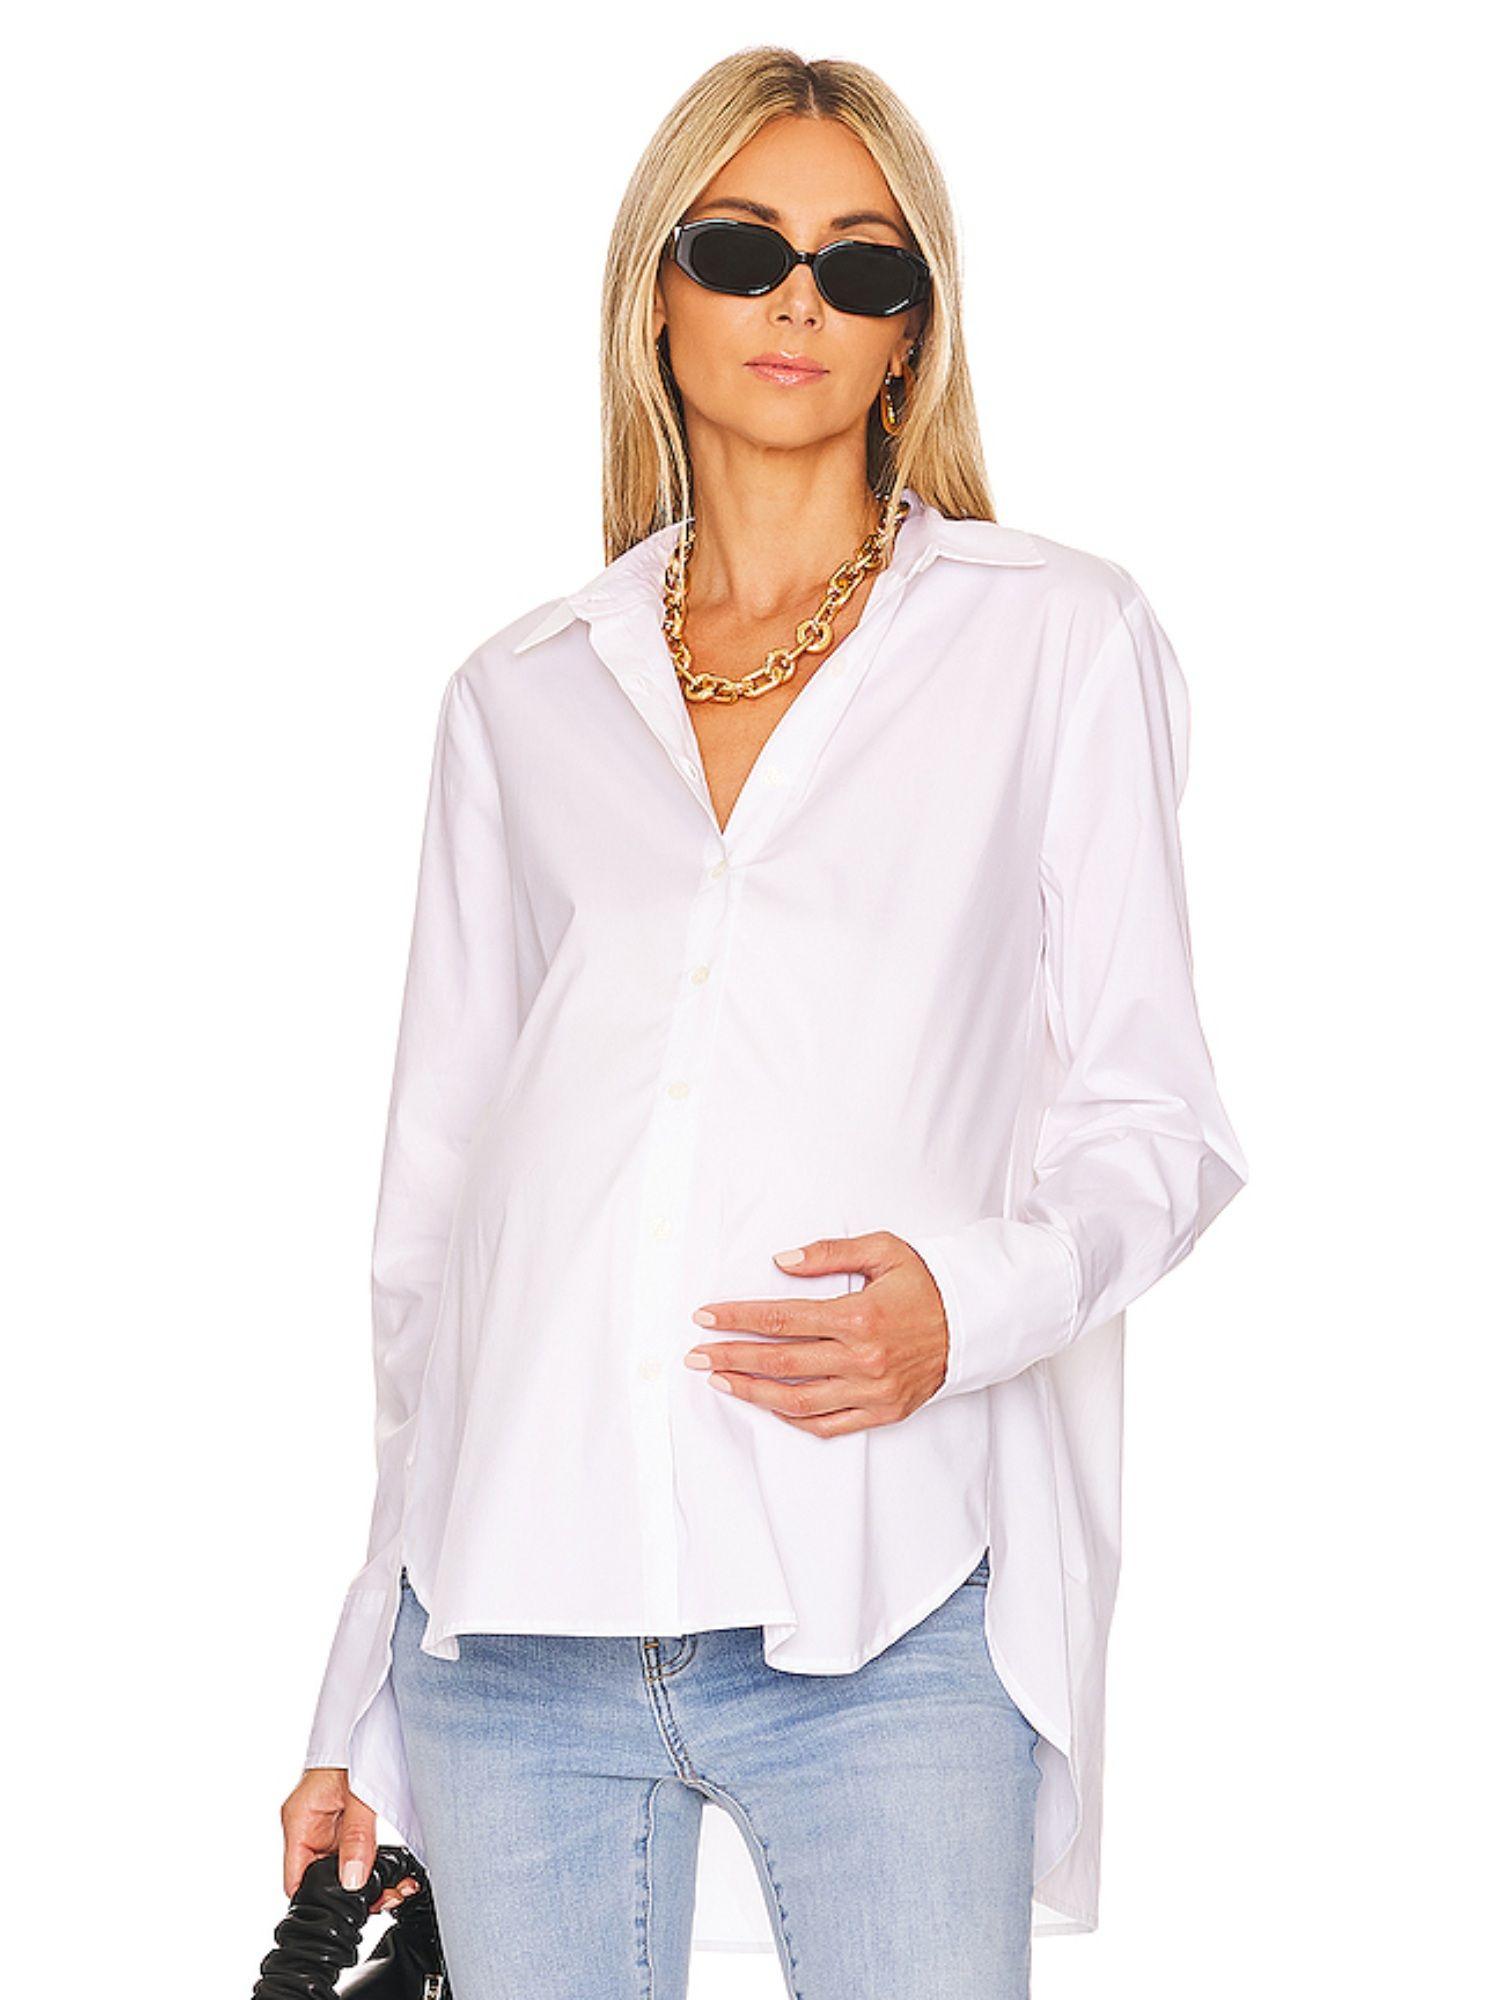 the classic button down maternity shirt